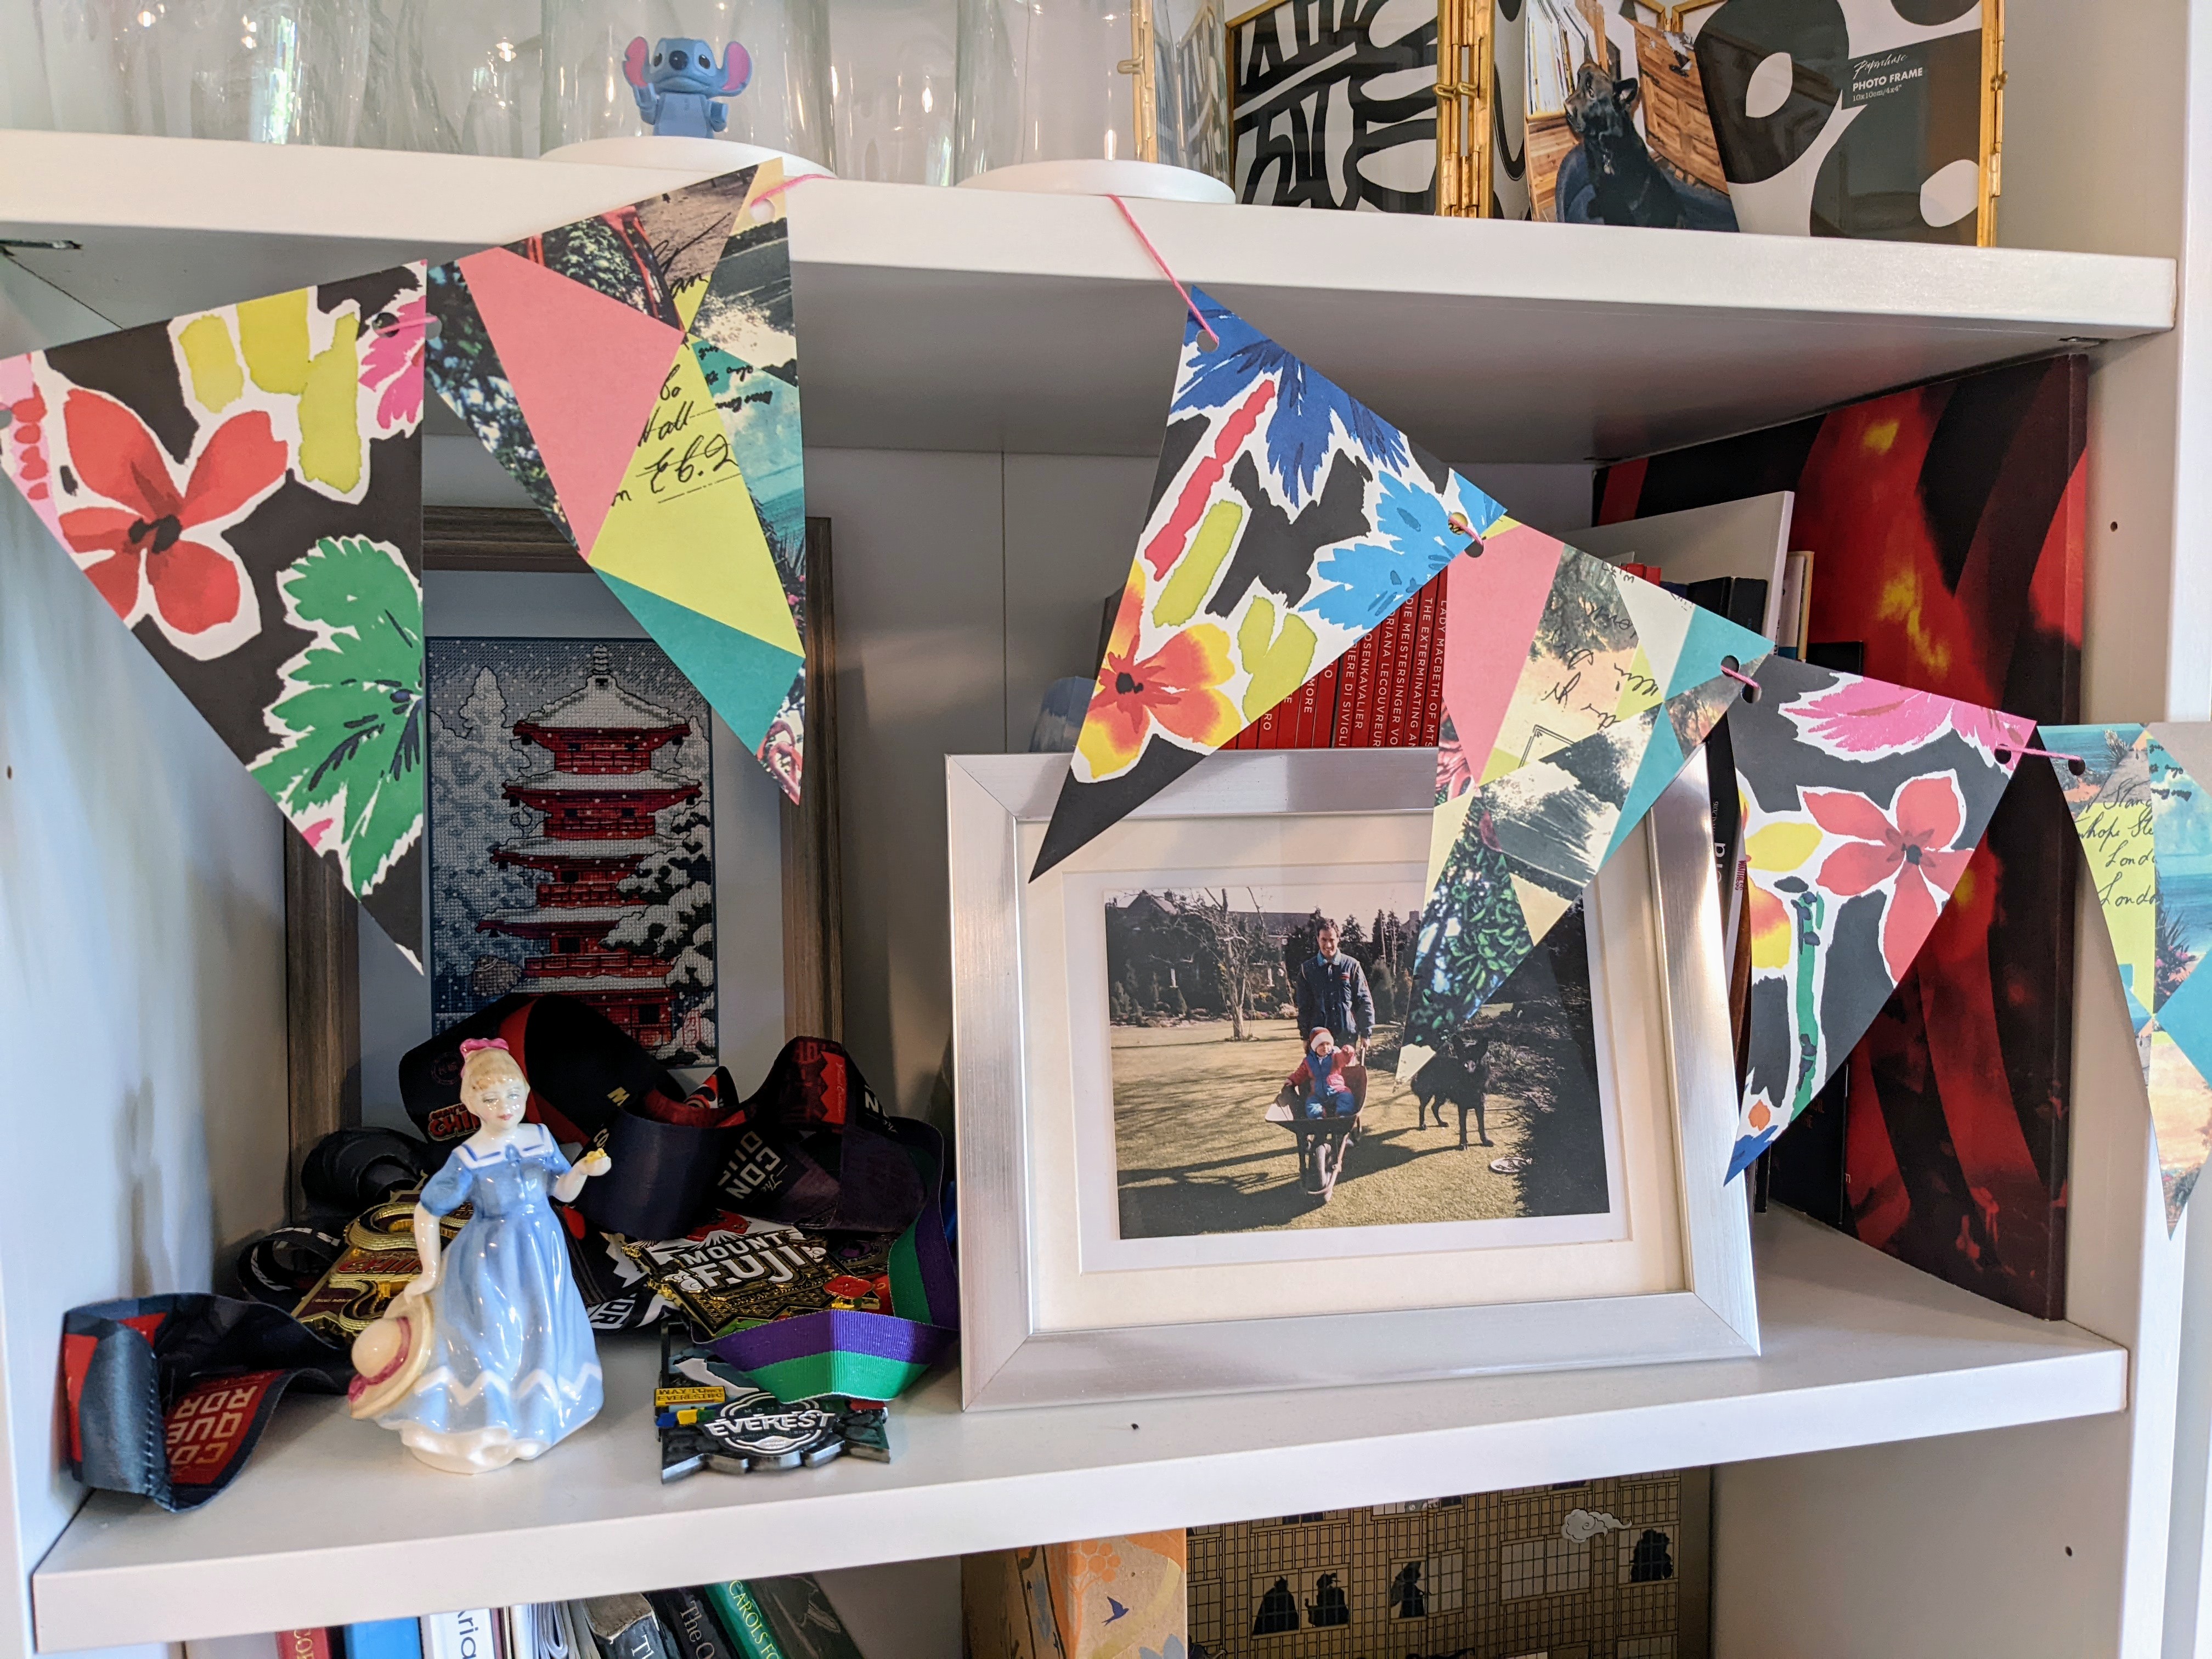 A close-up of some of the paper bunting in front of a shelf that has a framed photo and some small figurines. The bunting is a colorful floral pattern and looks very nice with the white bookshelves. 